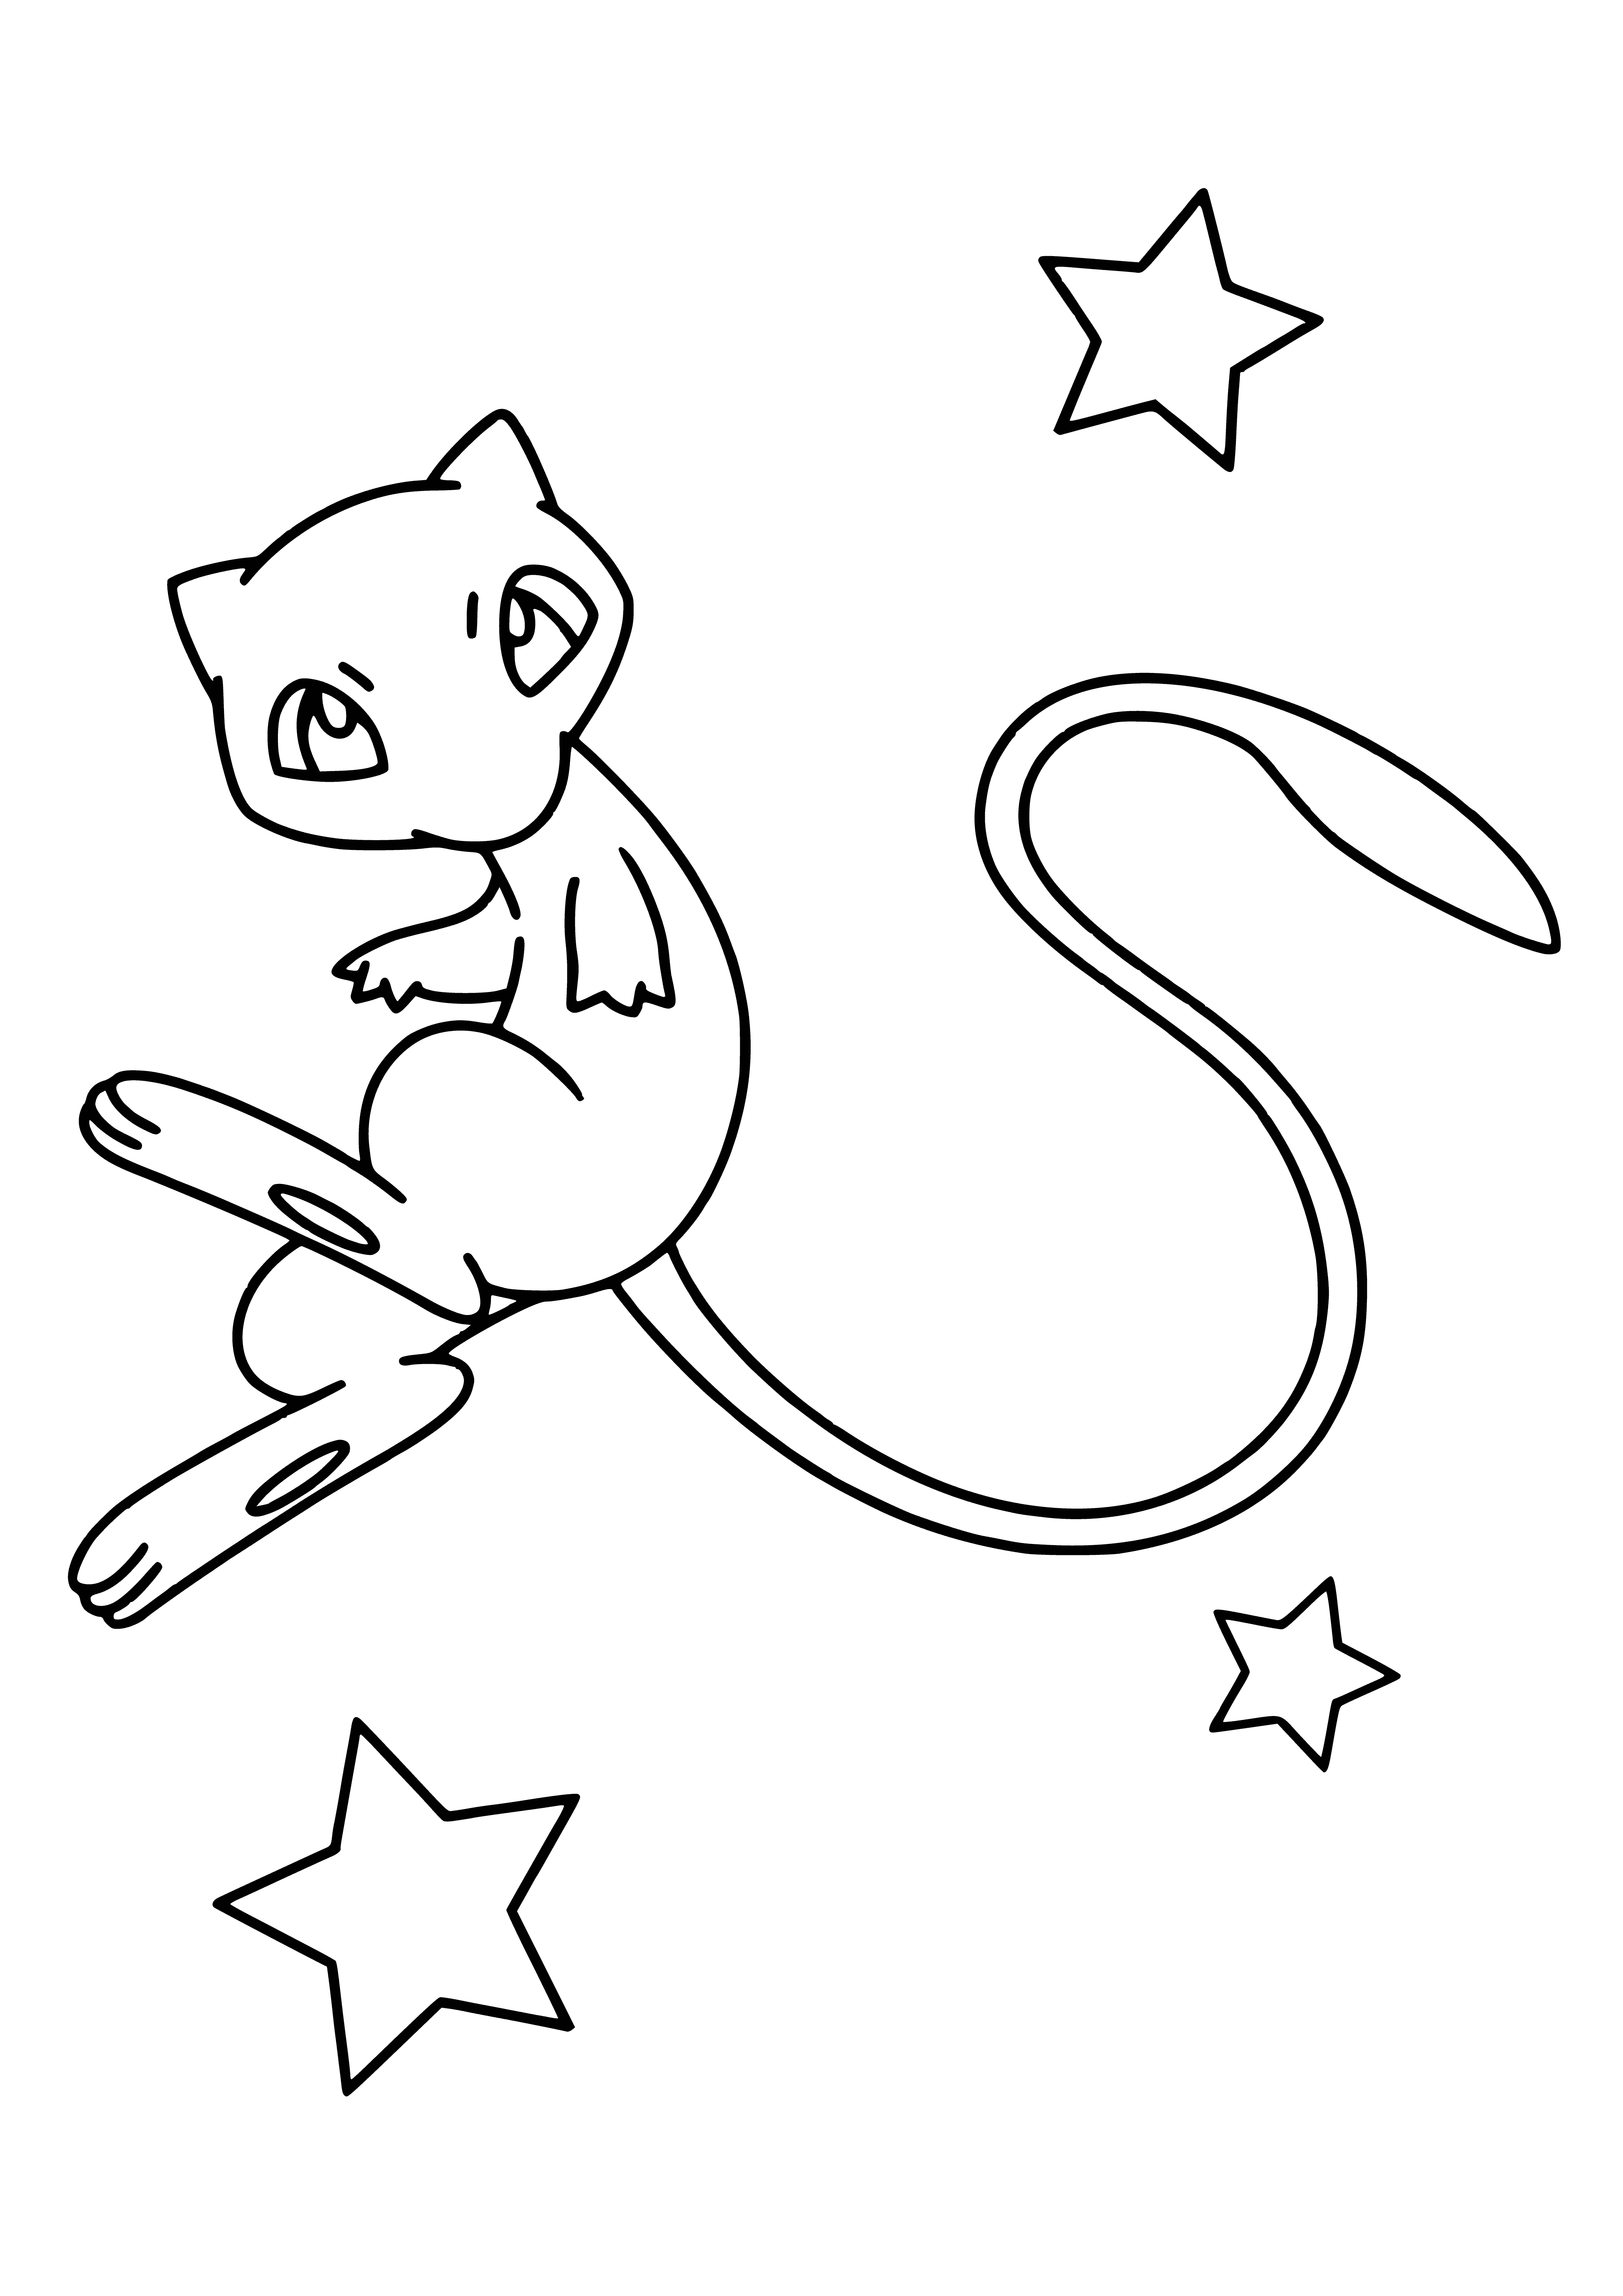 coloring page: Small, pink, cat-like Pokemon Mew has blue eyes and a long tail, giving it a cute, innocent appearance.